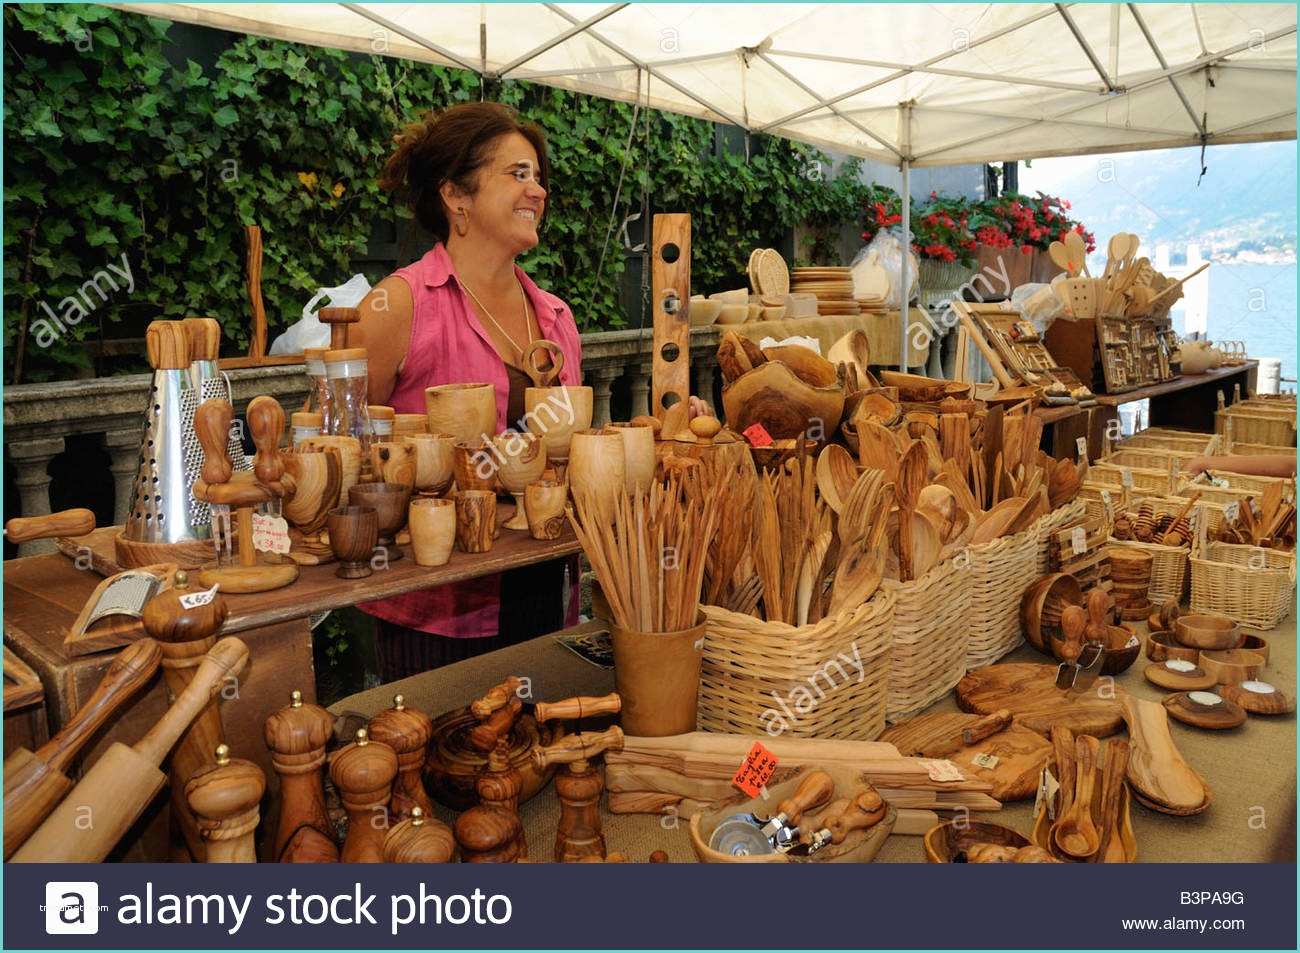 Handmade Wood Products that Sell Selling Handmade Olive Wood Items On Lakeside In Bellagio